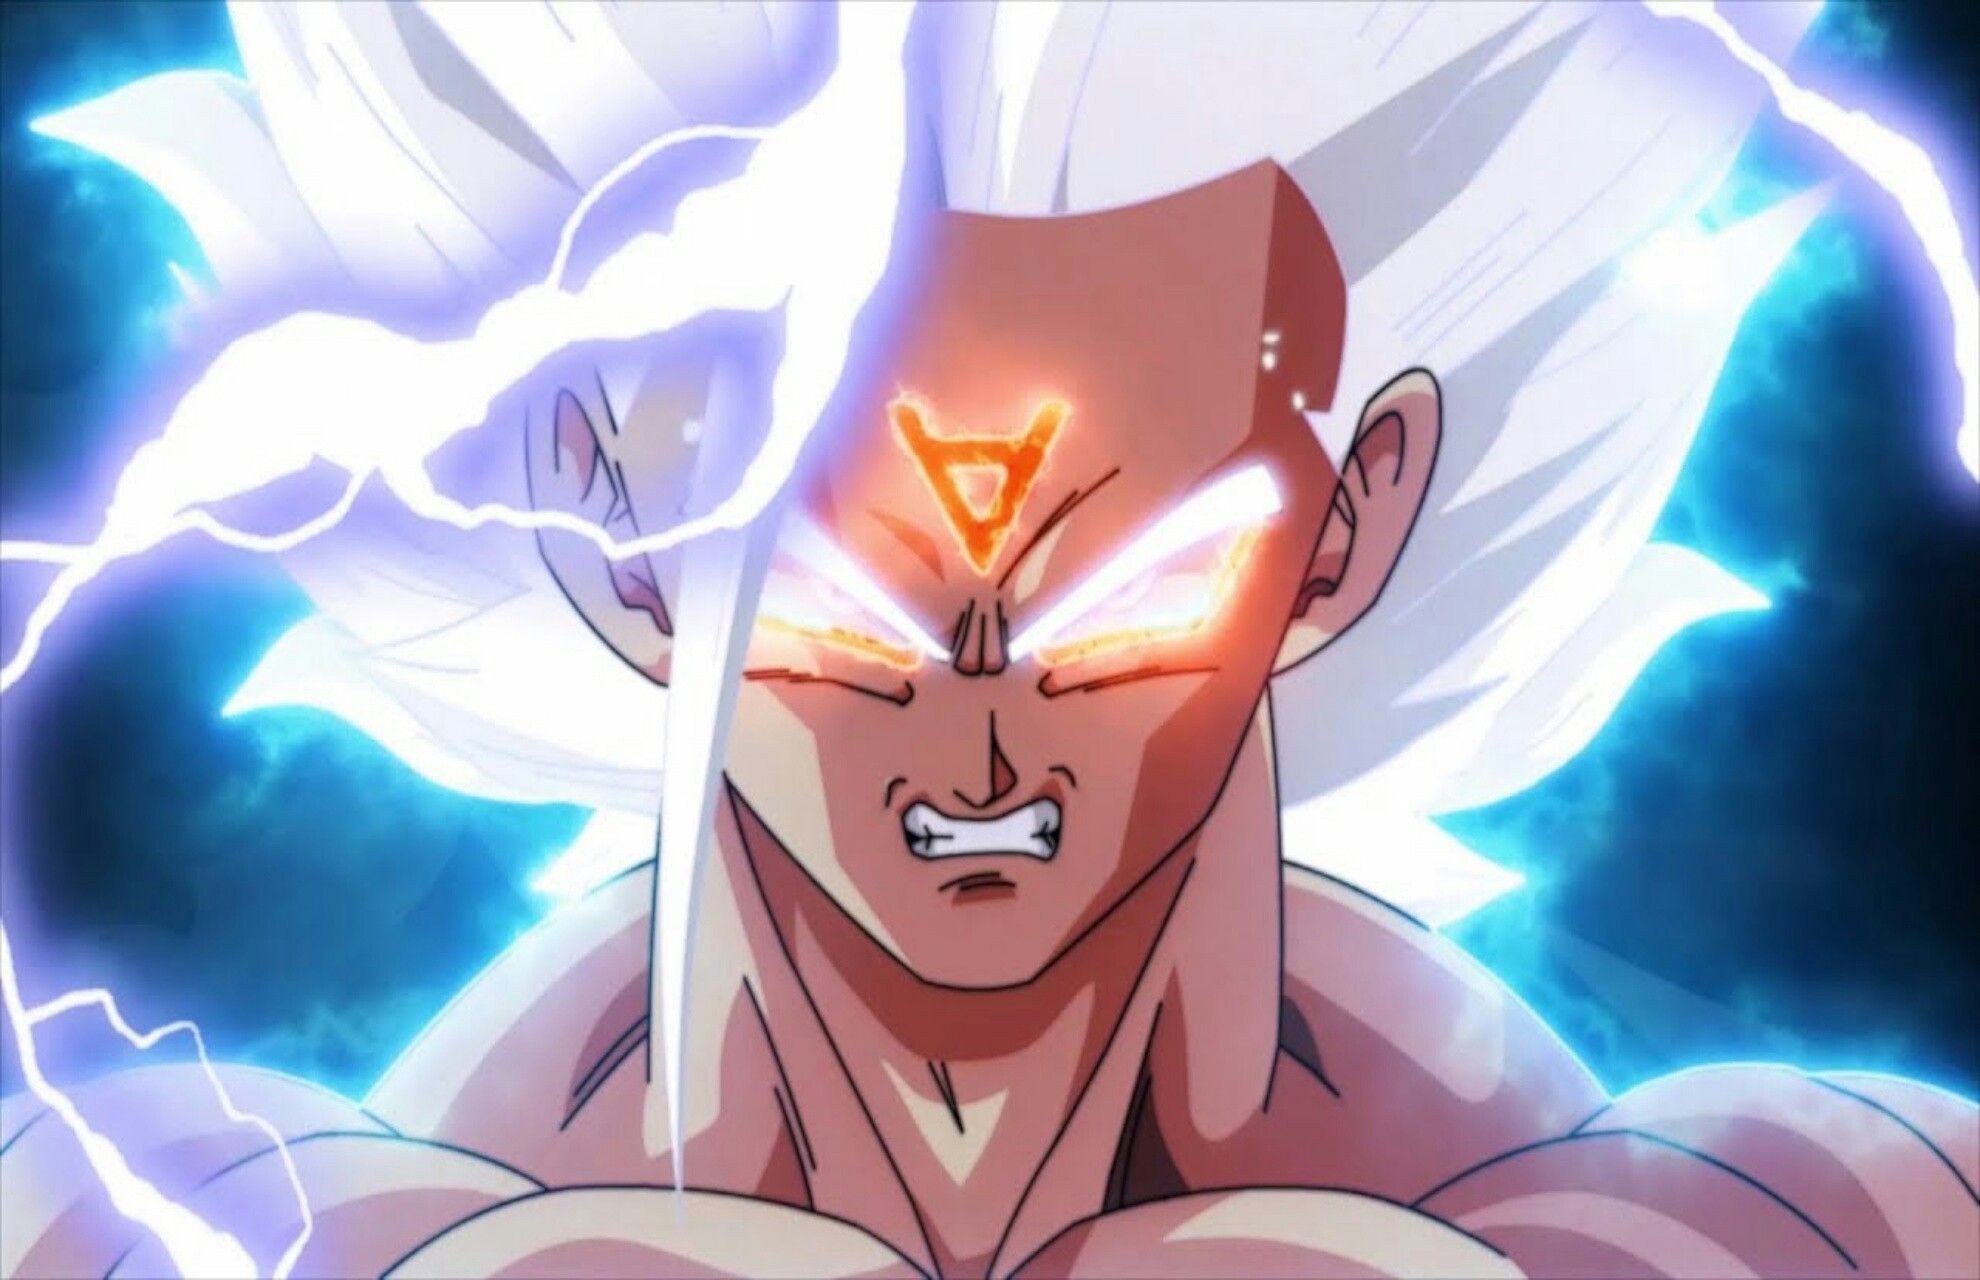 Goku's new form with blue hair - wide 7